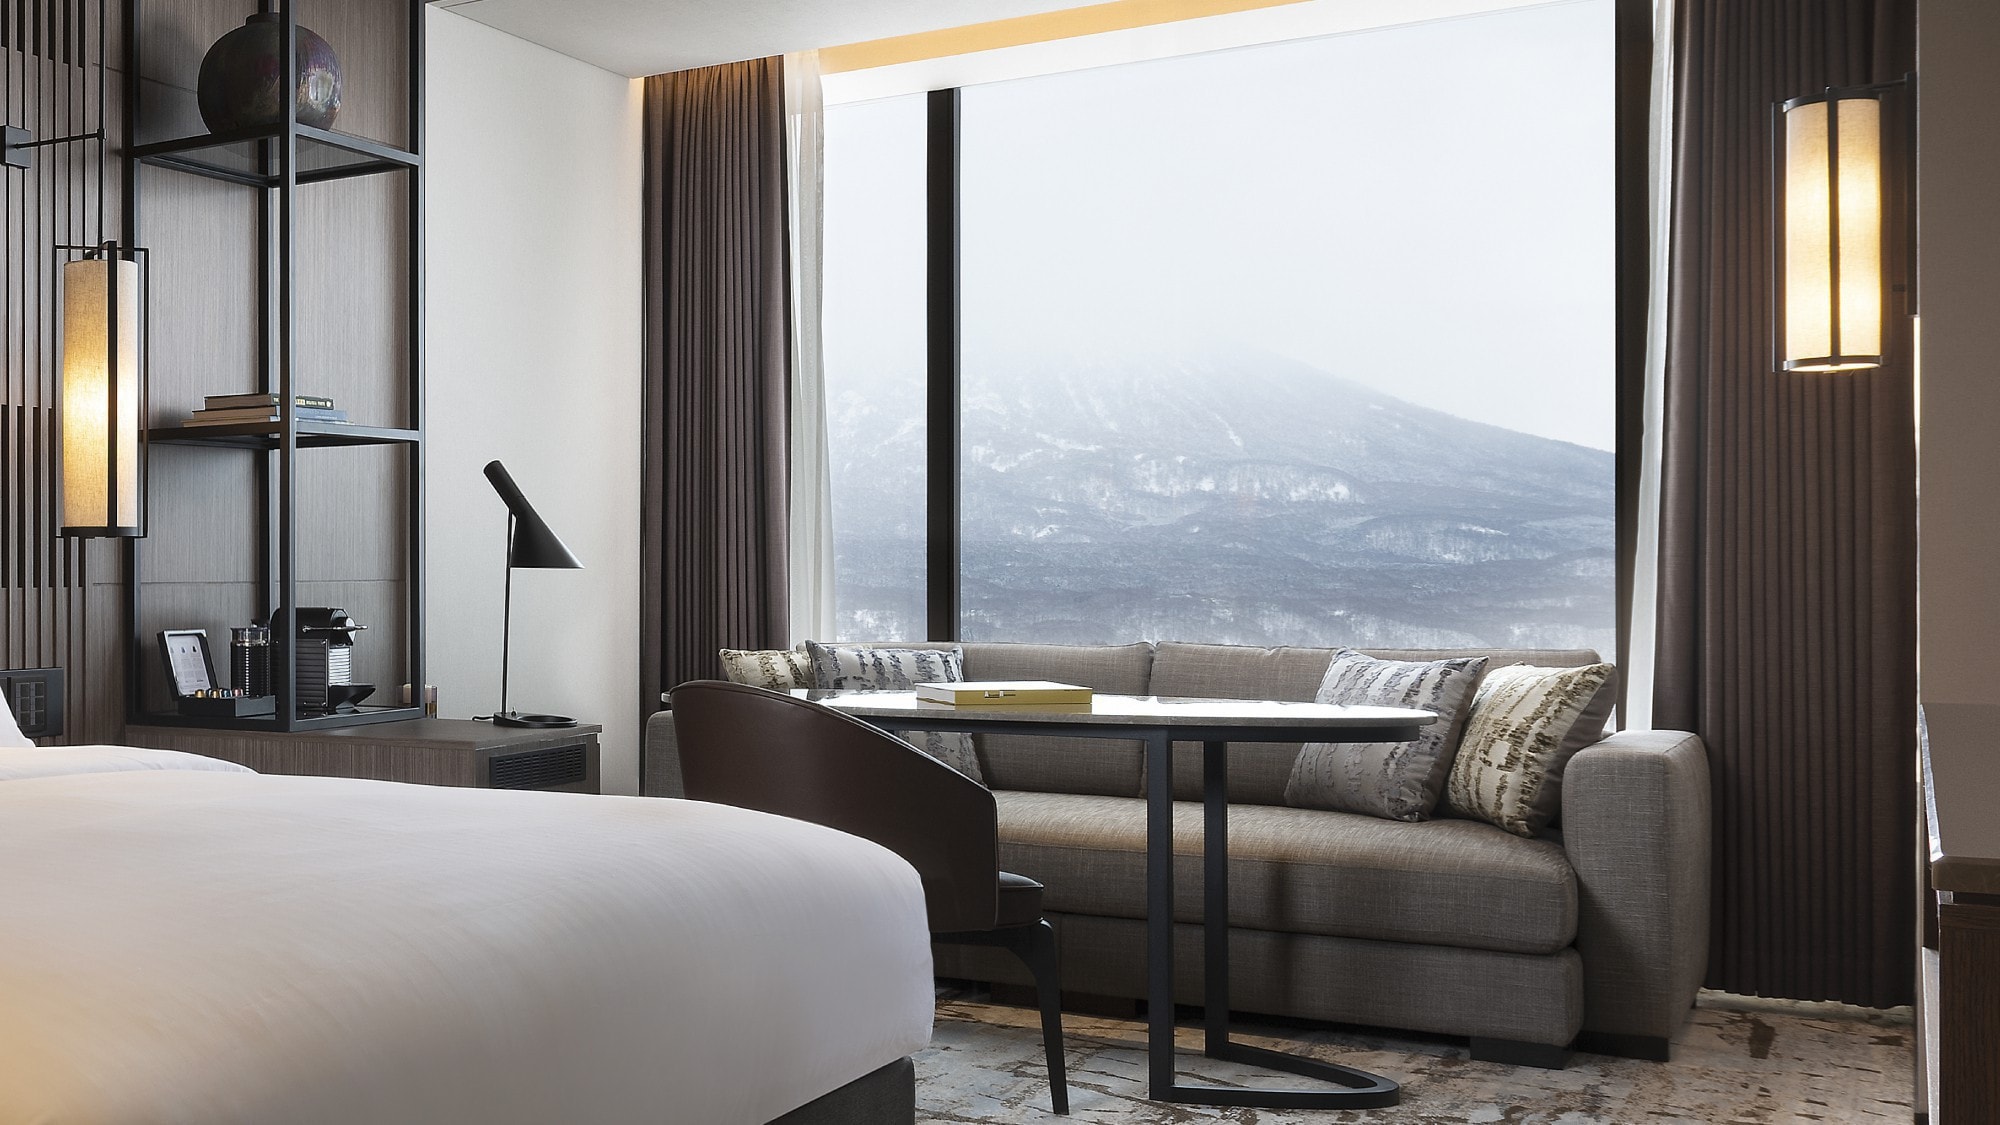 ◆ Directly connected to Niseko Village Ski Resort, a resort hotel surrounded by the magnificent nature of Mt. Yotei and Niseko Annupuri